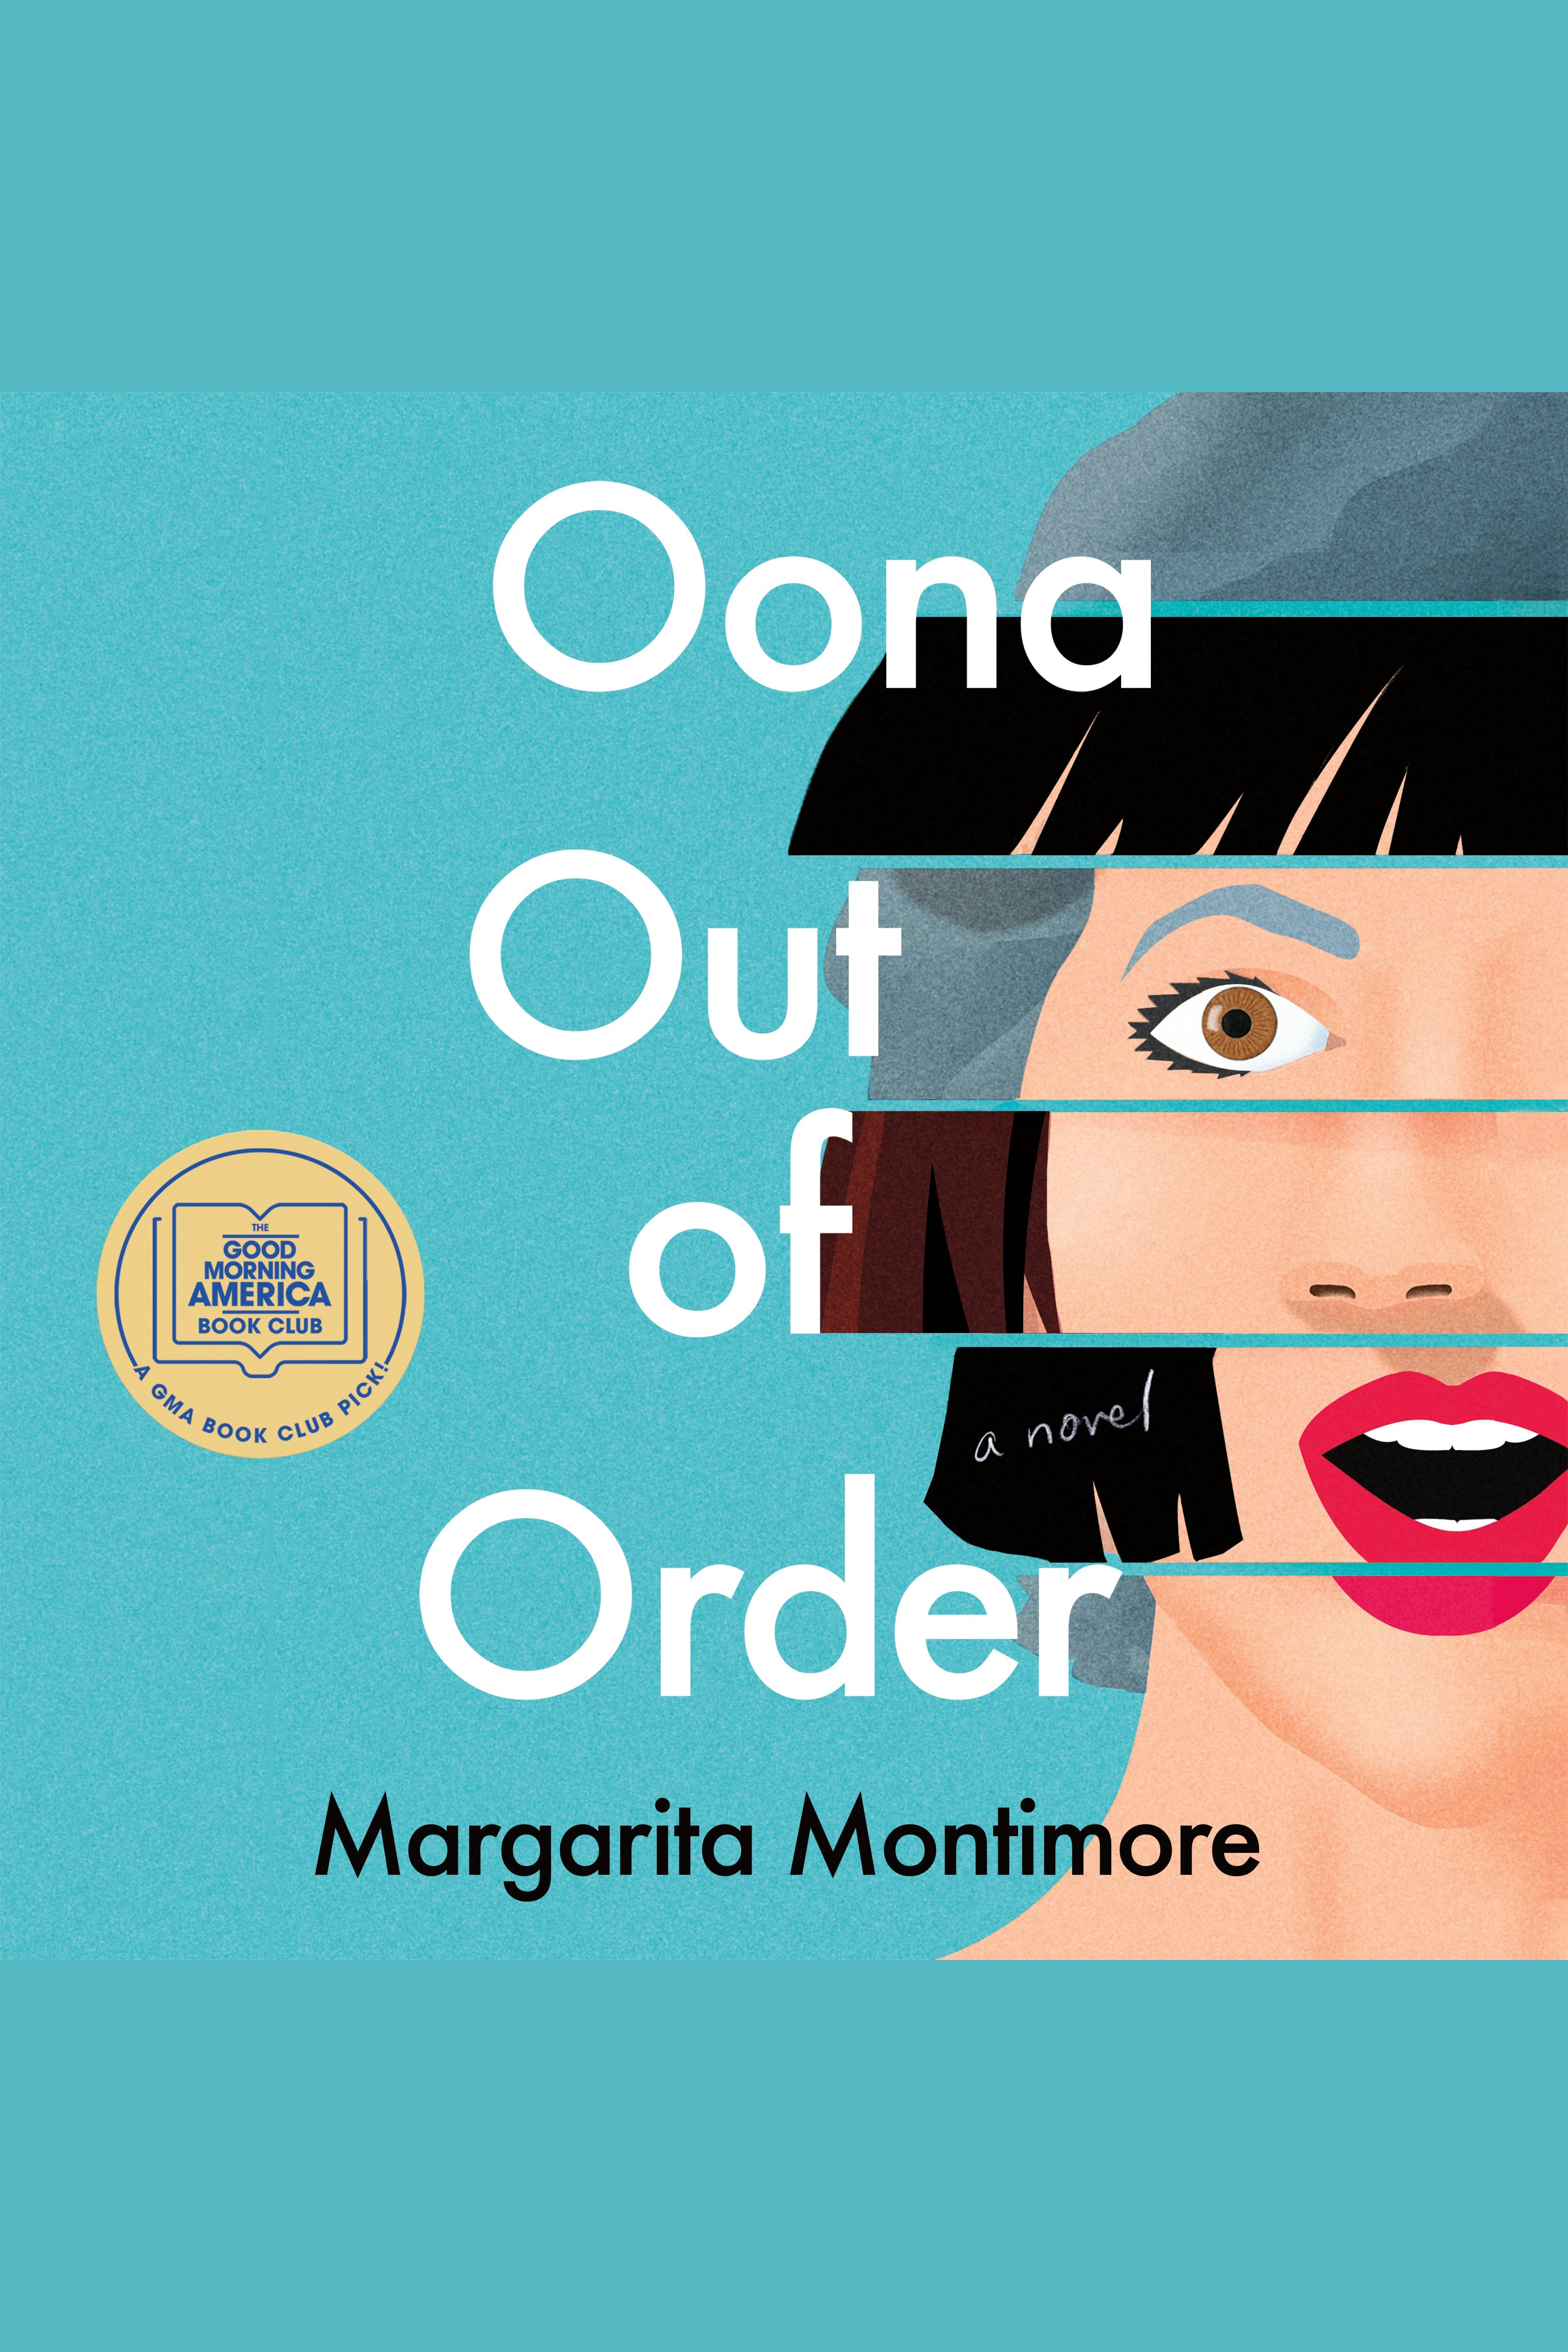 Oona out of order cover image